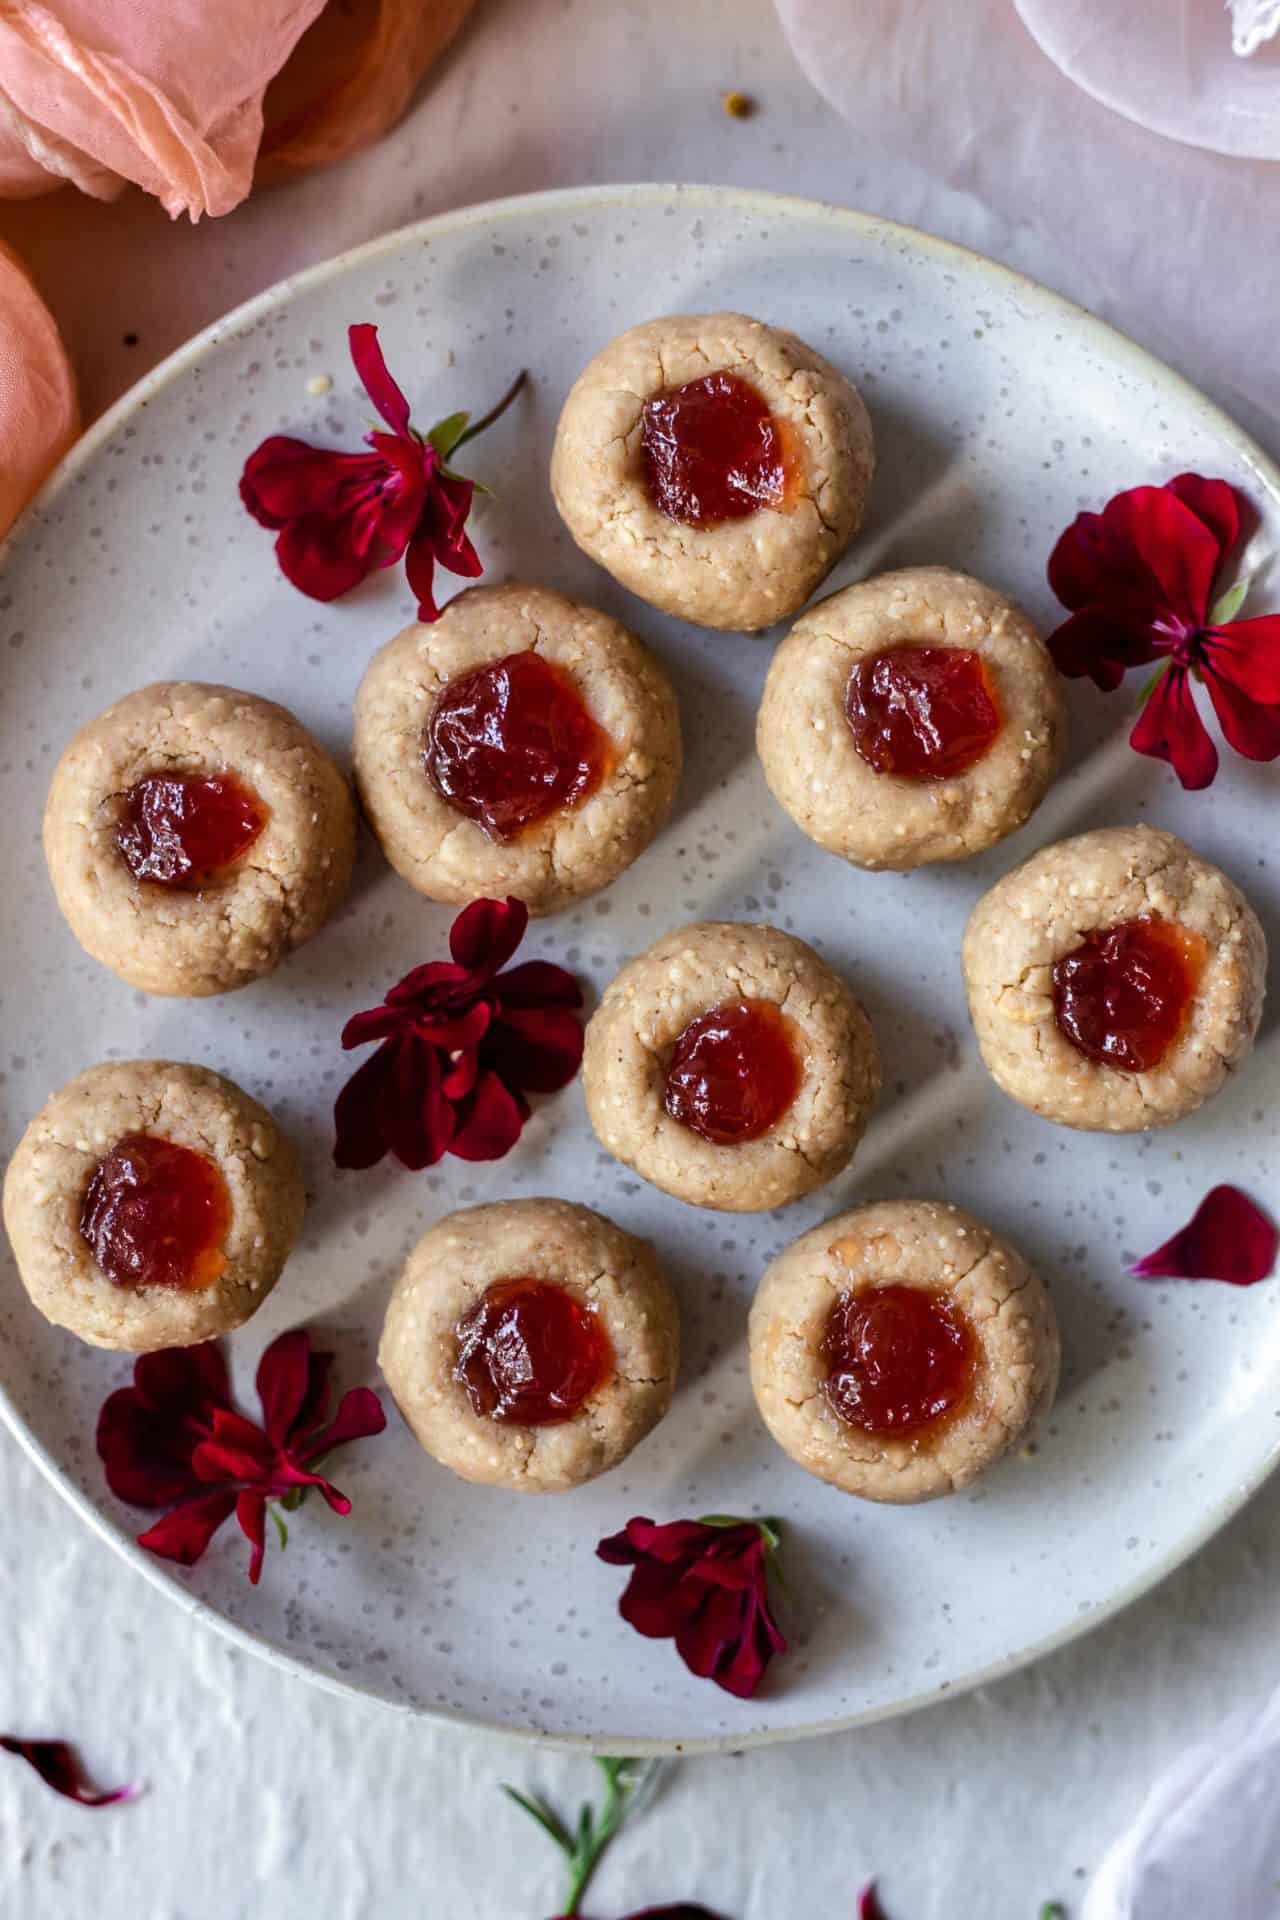 These No-Bake Peanut Butter and Jelly Thumbprint Cookies have that melt-in-your-mouth texture, they are easy to make and so very delicious!